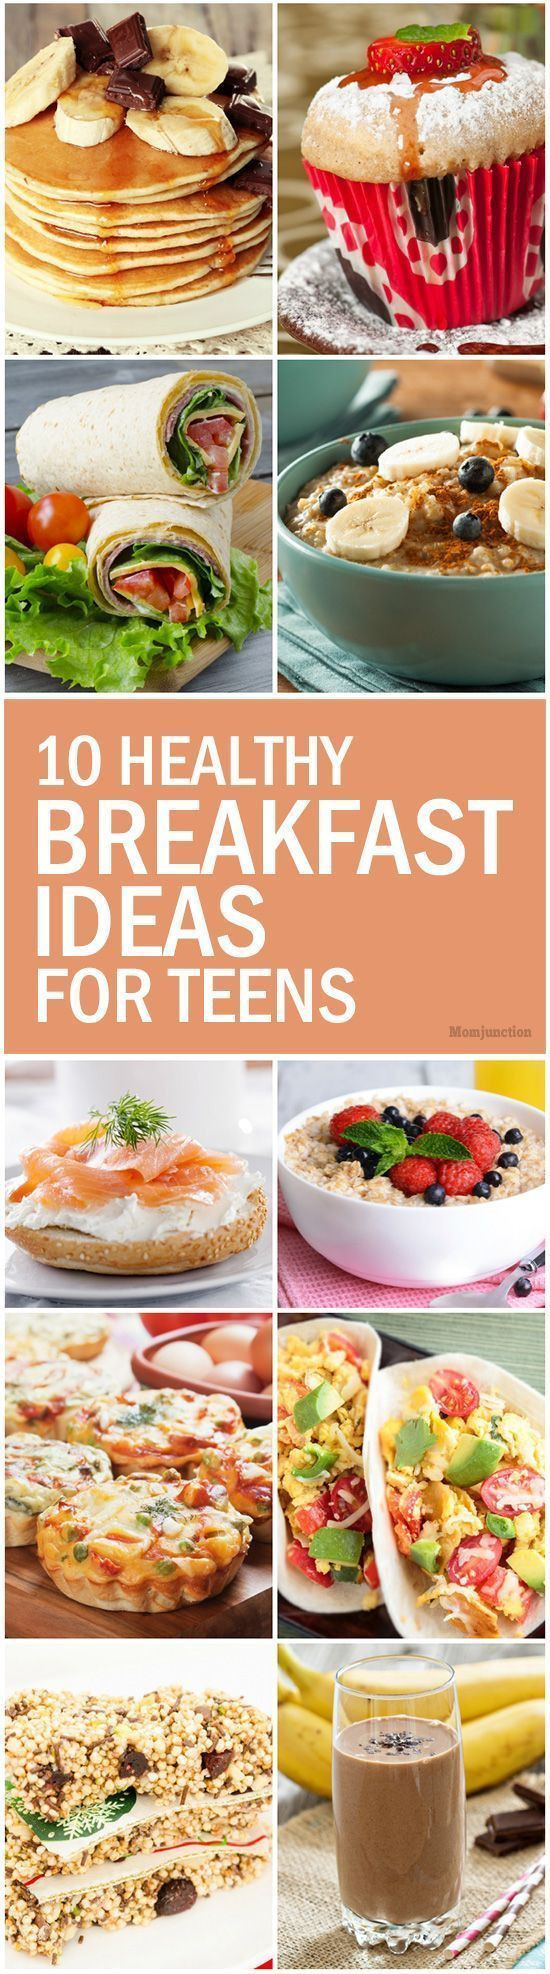 Healthy Breakfast For Teens
 1000 images about Teen Topics on Pinterest